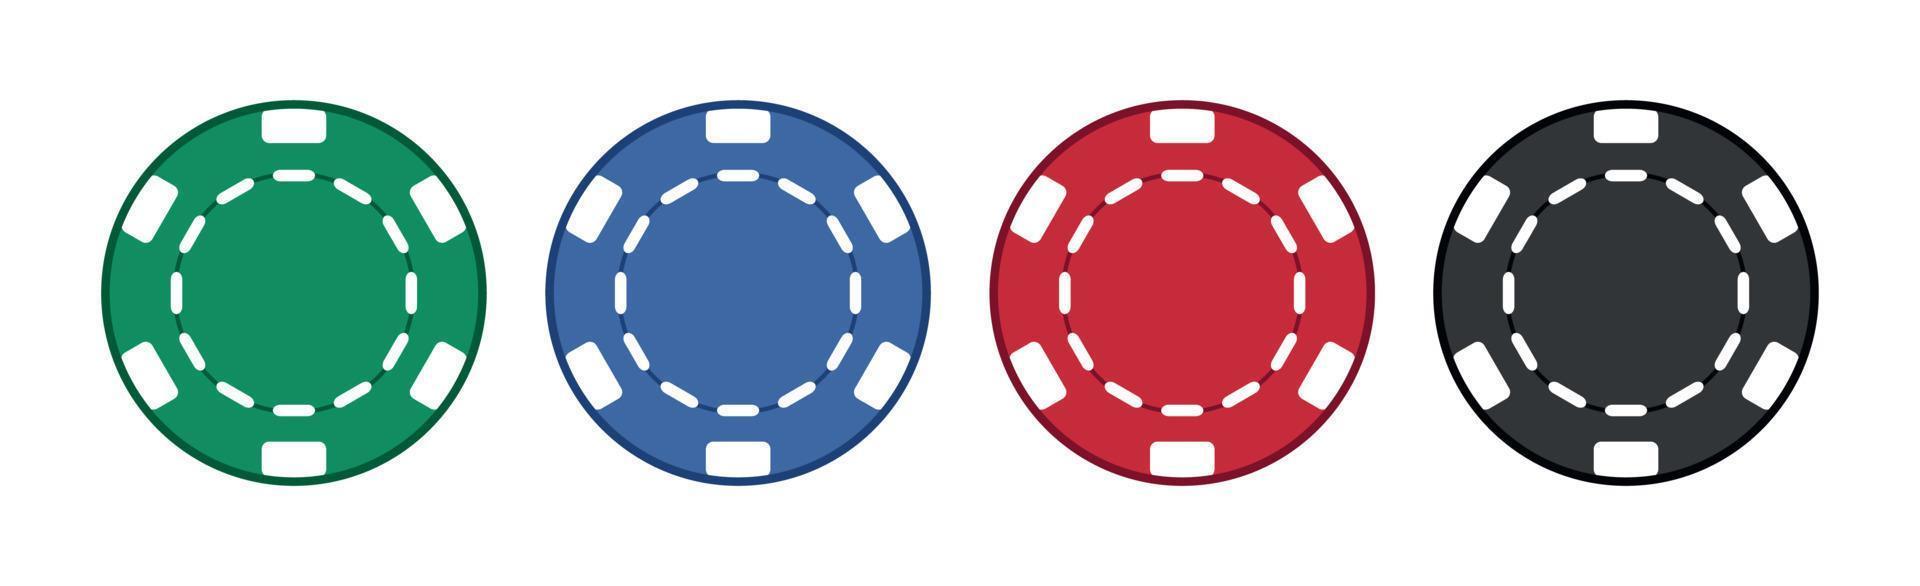 Set 4 different poker chips casino element on white background - Vector